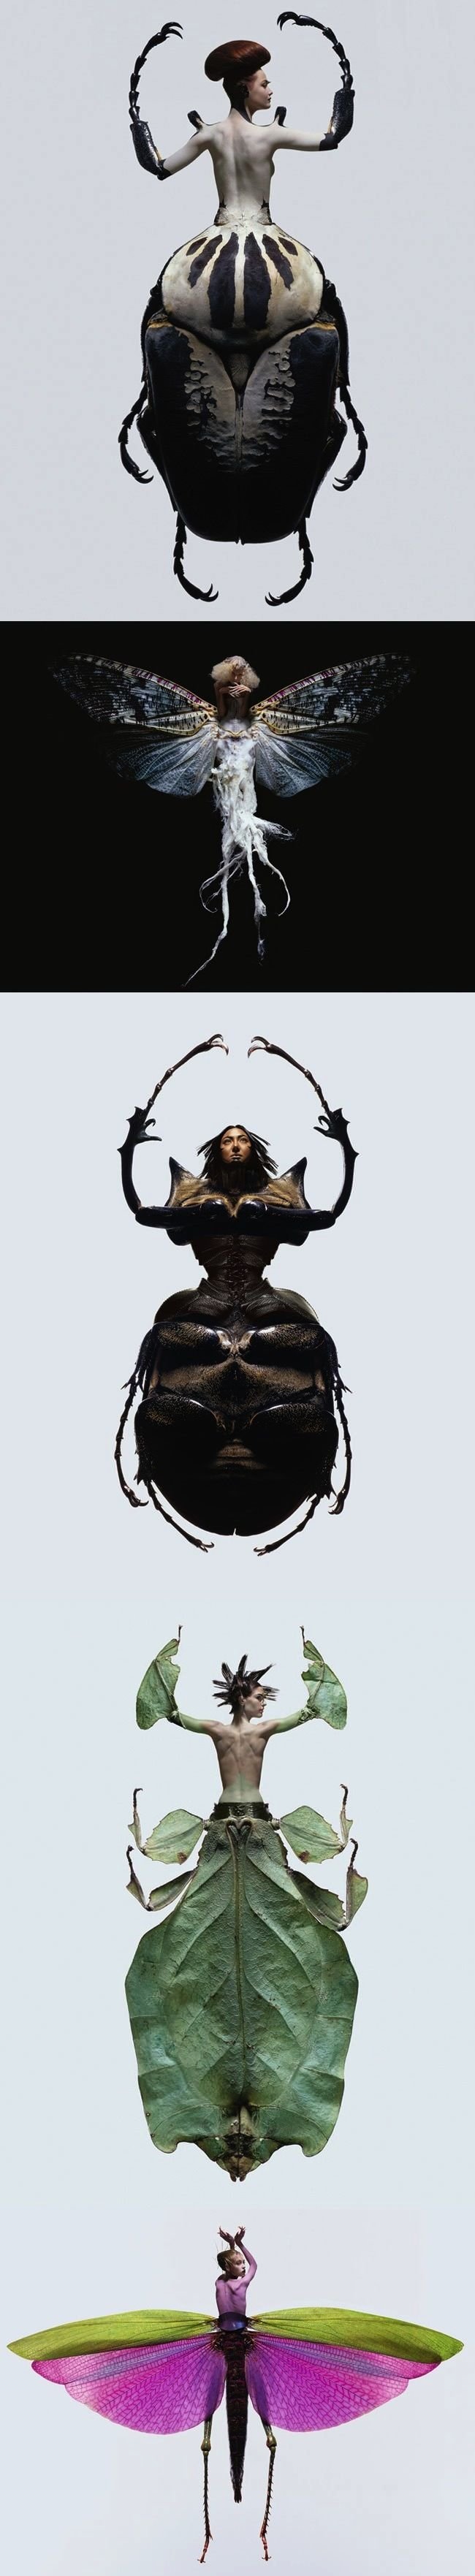 Insects x Women.